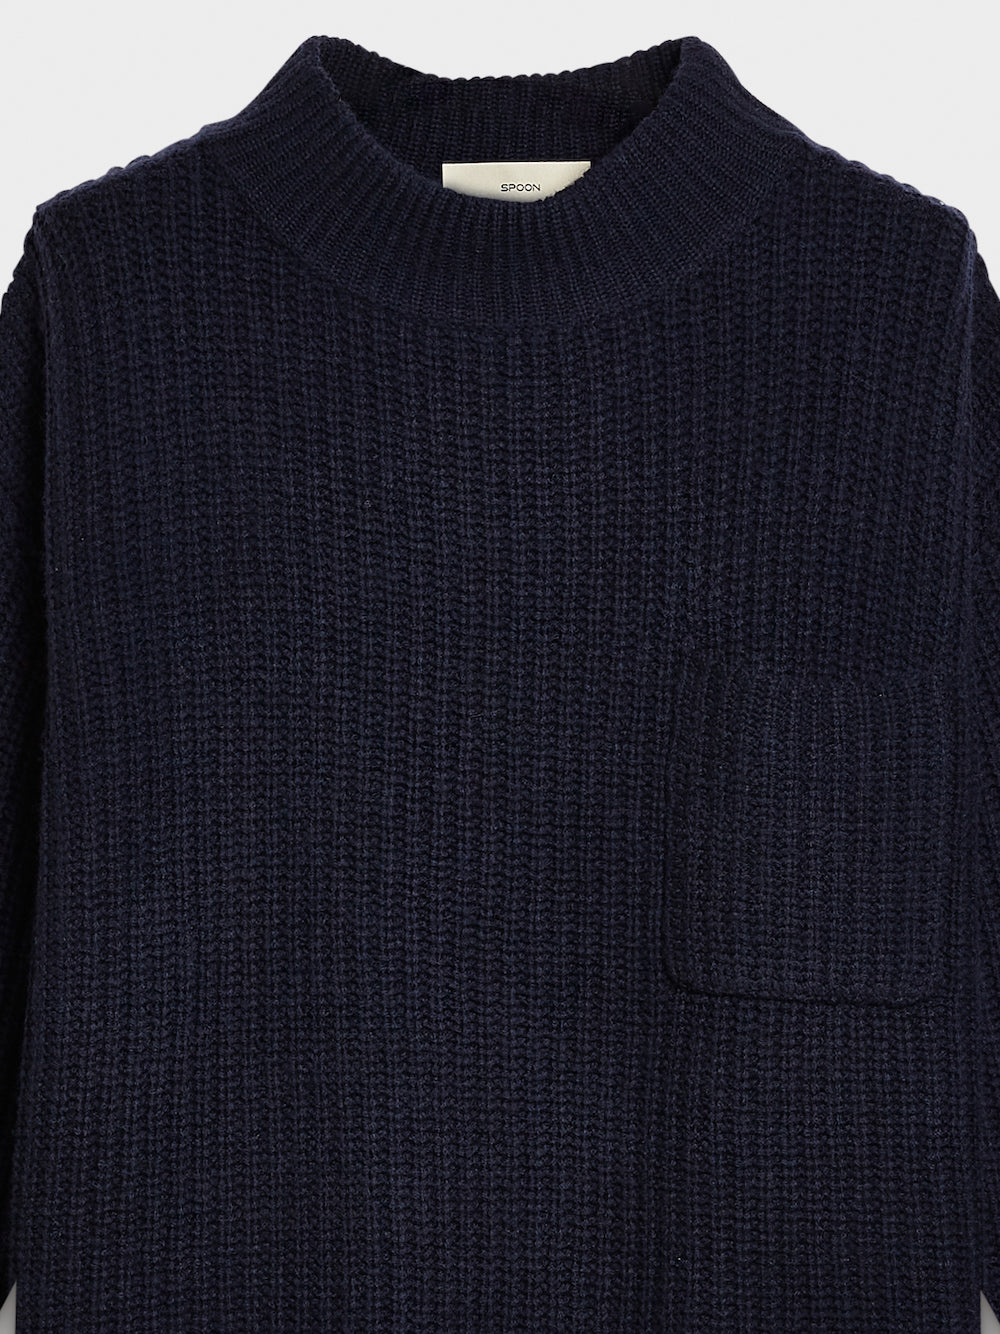 Pocket Wool Cashhmere Sweater